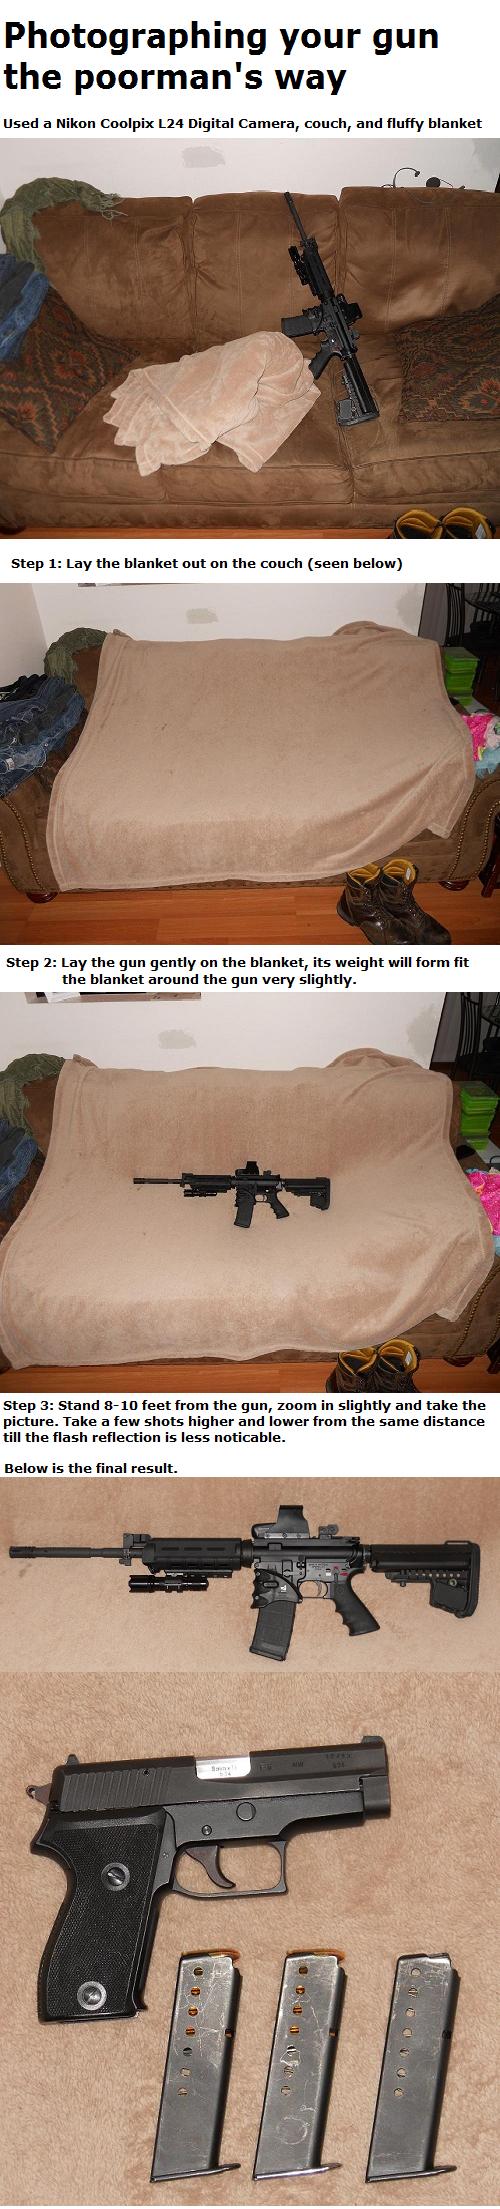 if you need instructions on how to photograph your GUN!